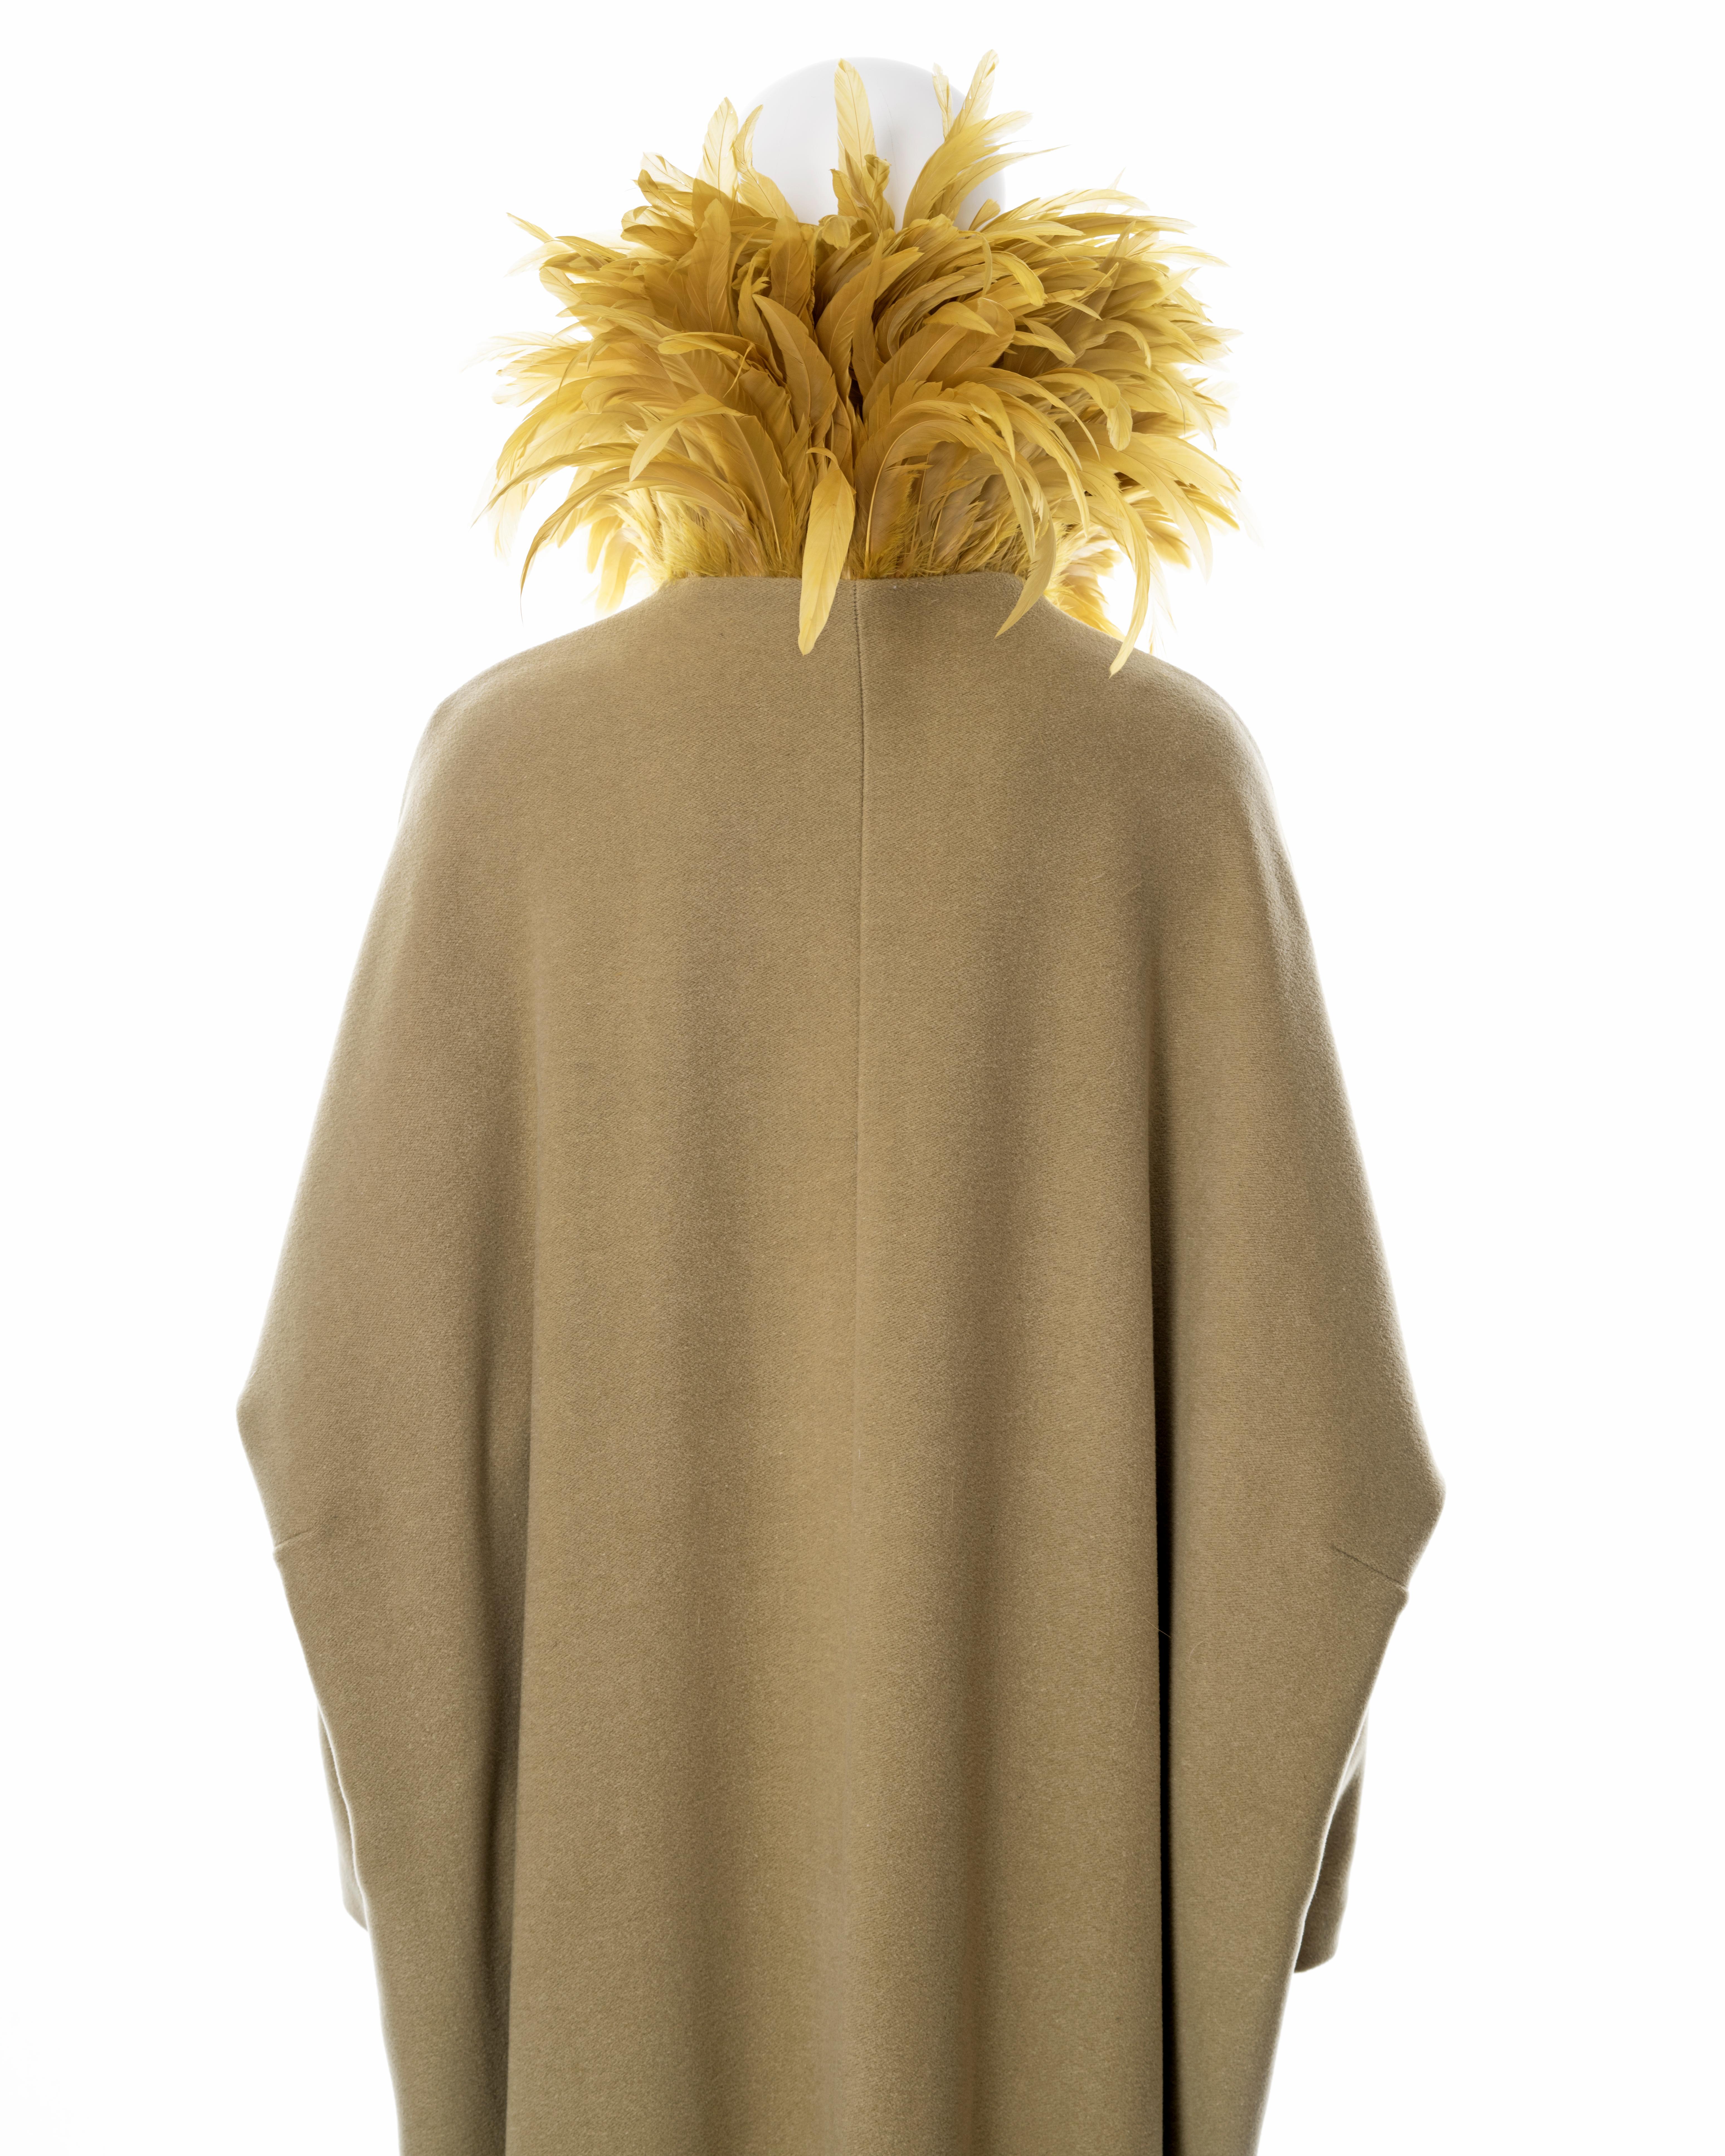 Dolce & Gabbana sage green wool cocoon coat with feather collar, fw 1990 For Sale 12